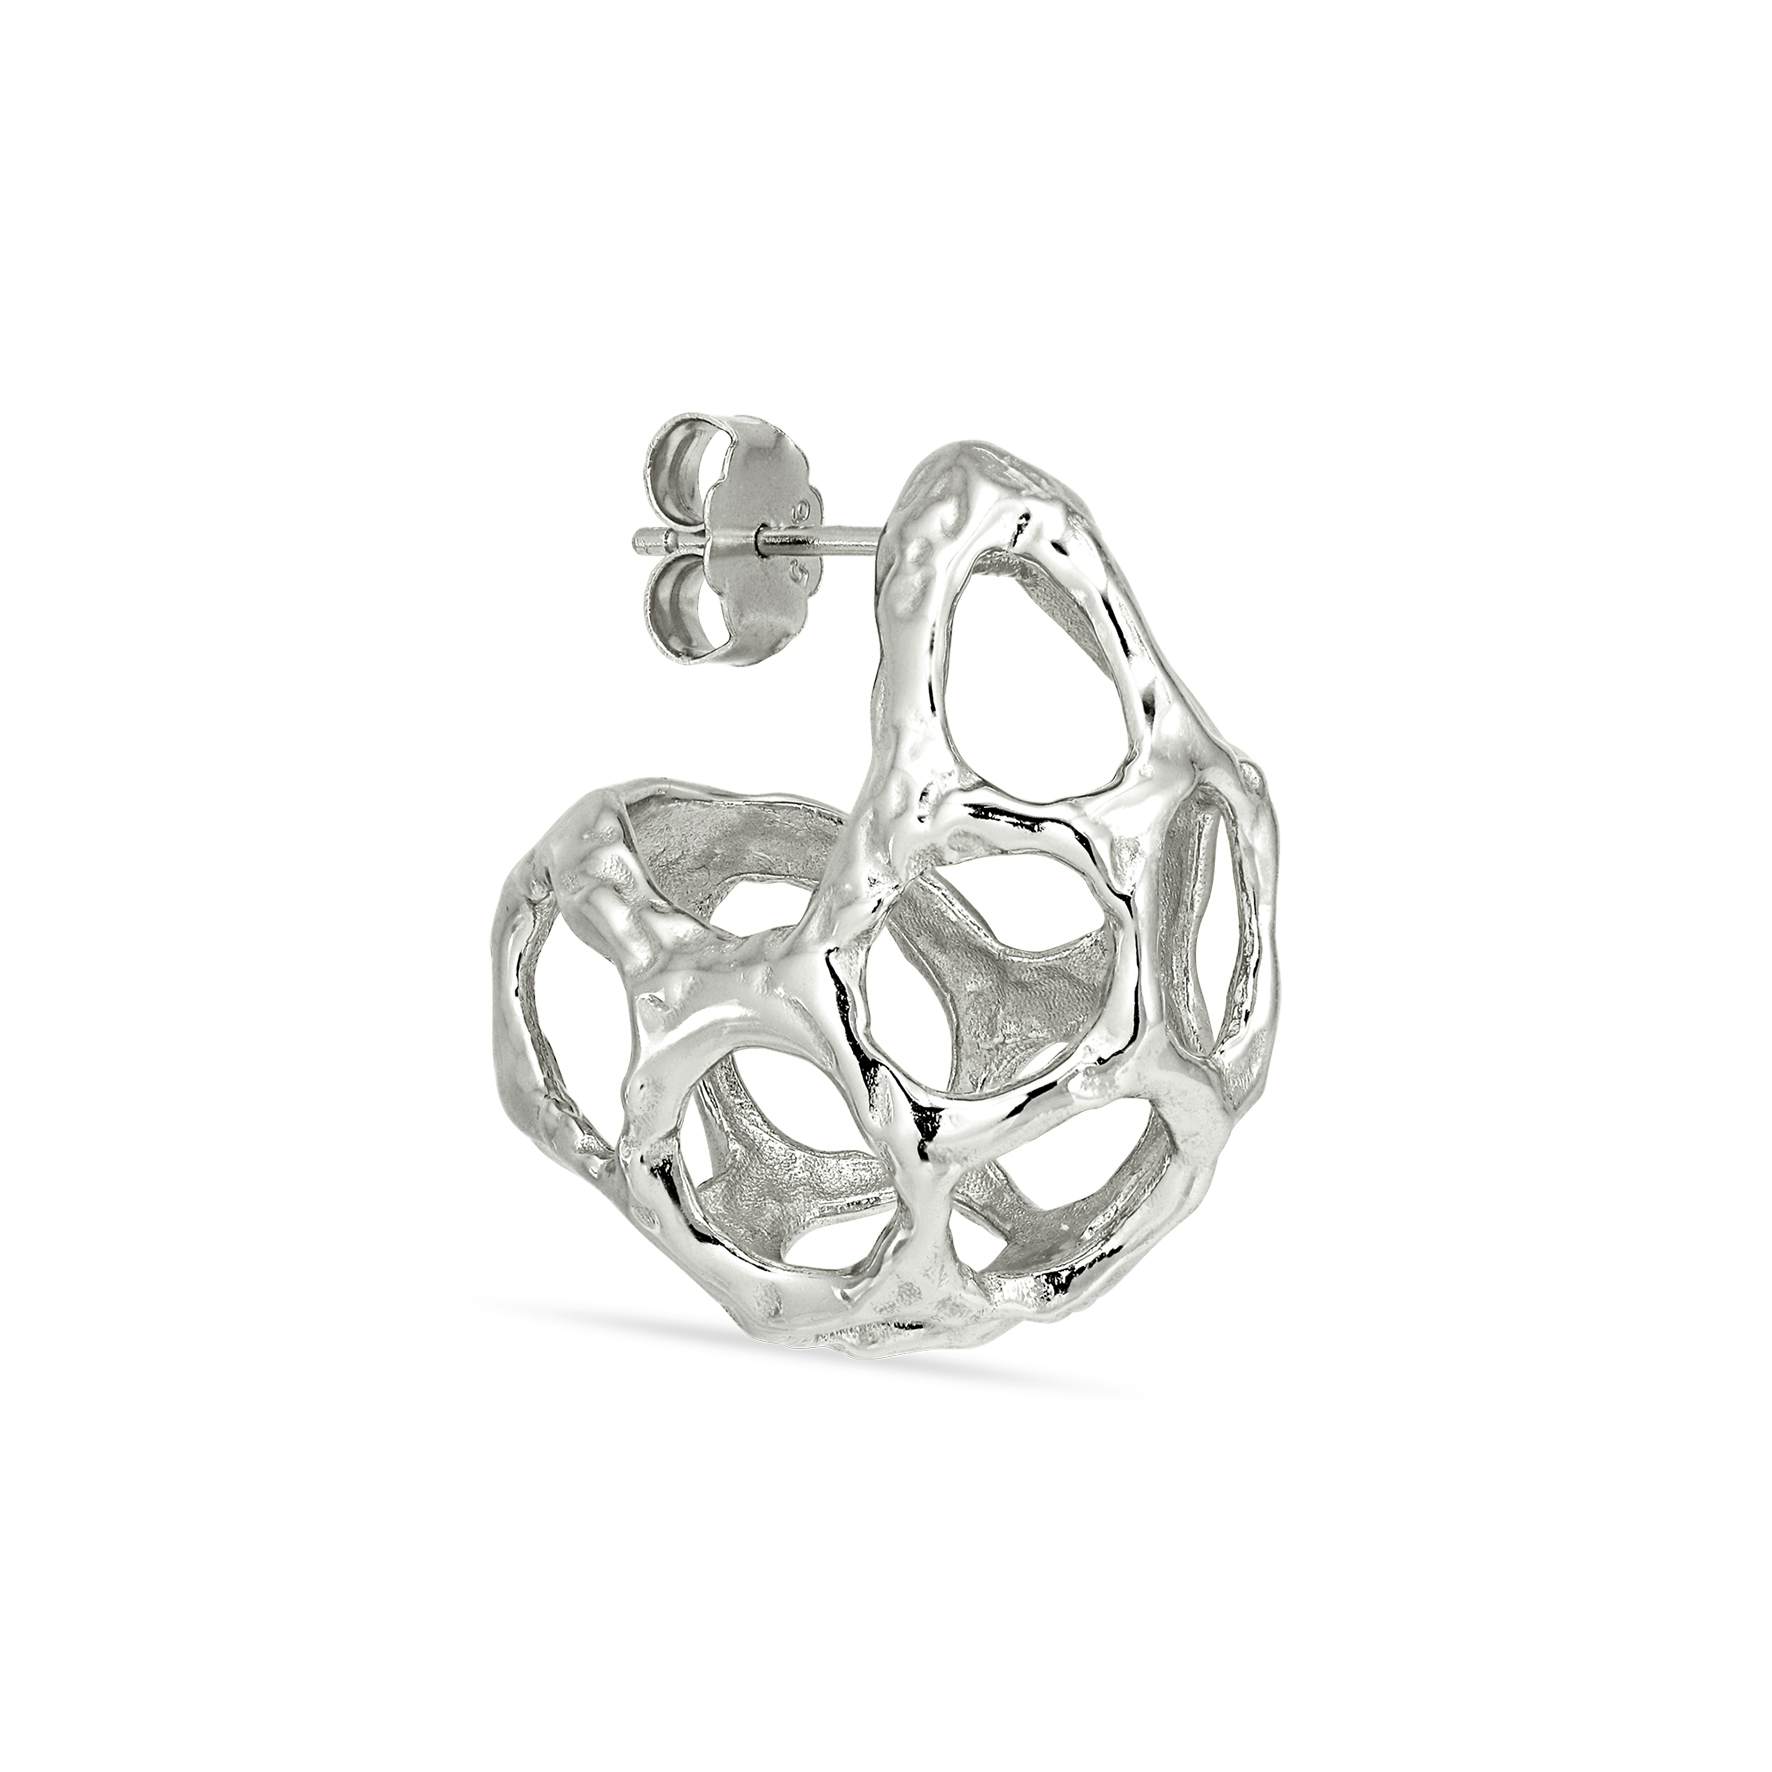 Chunky Space Earring Right from Jane Kønig in Silver Sterling 925